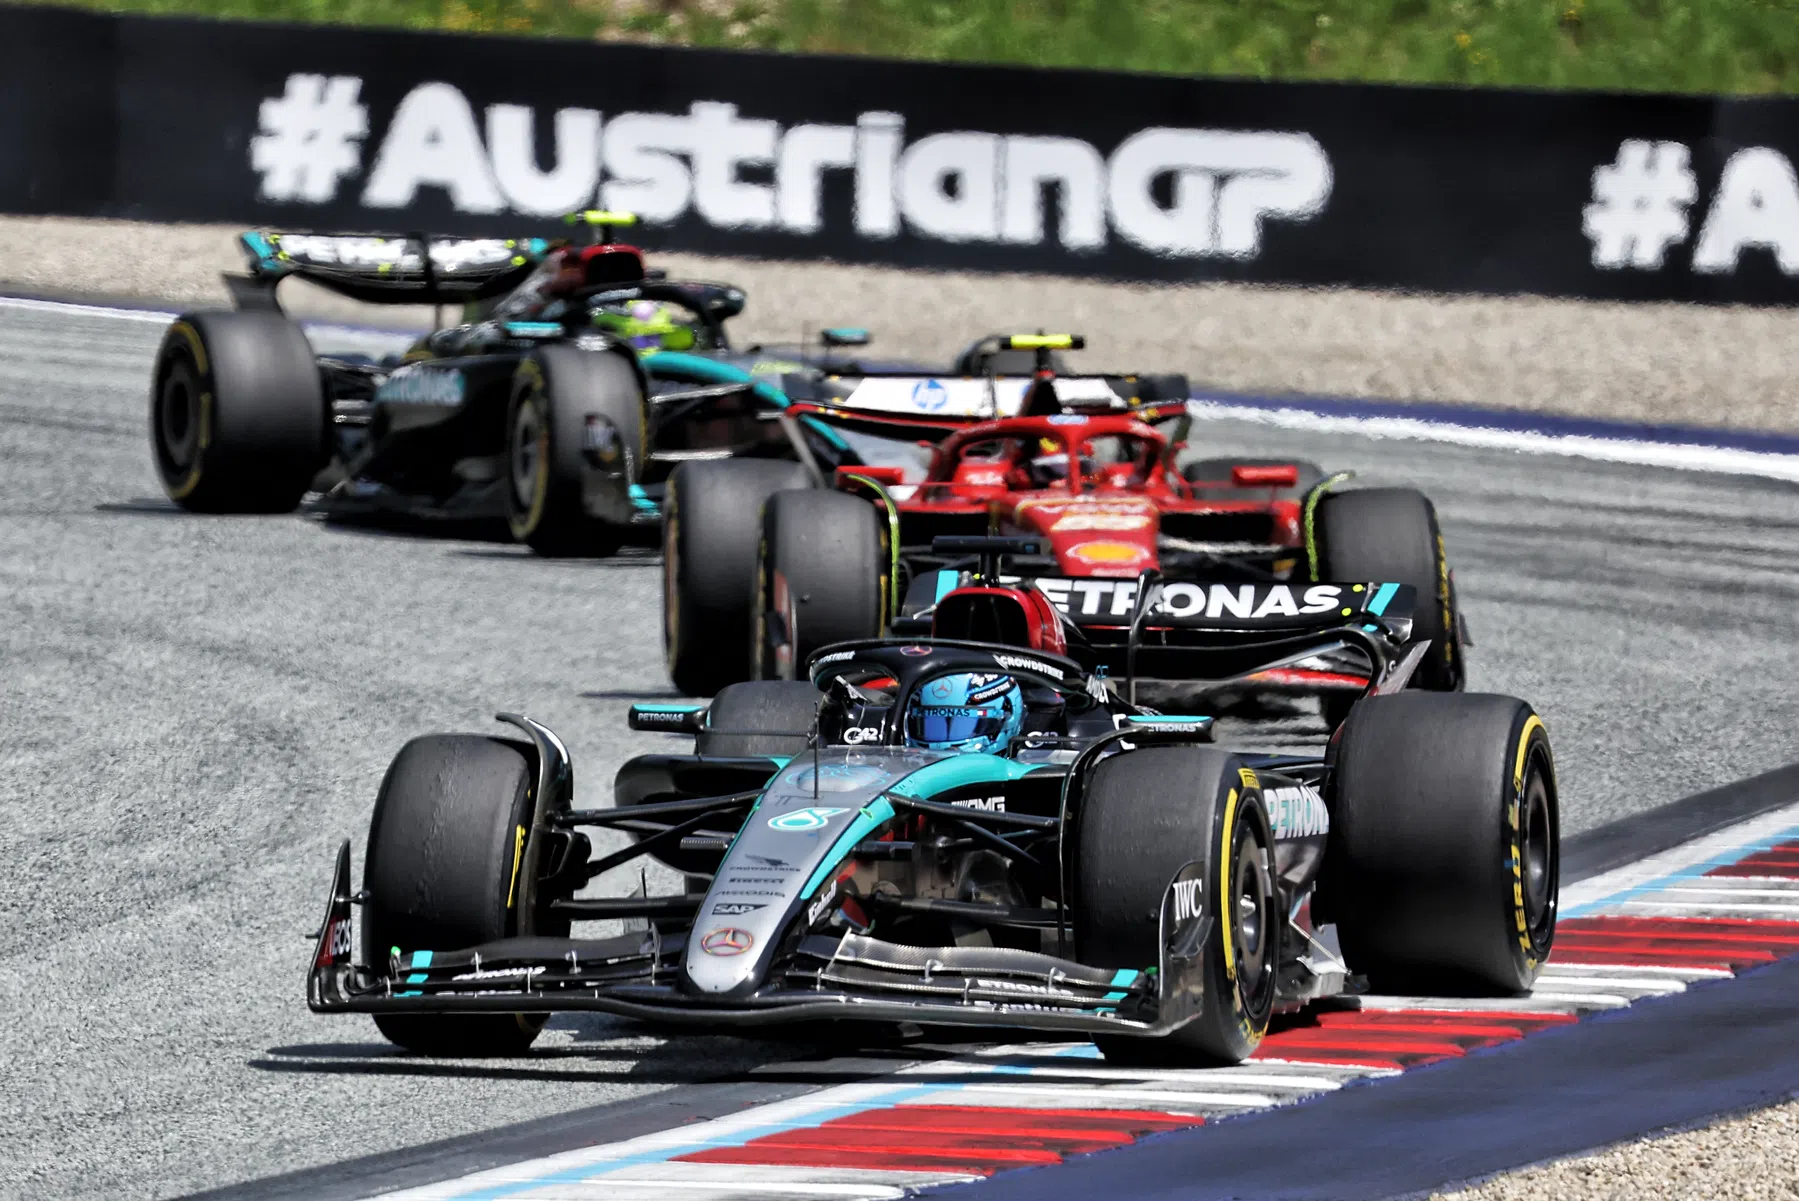 Mercedes made sacrifices for qualifying in Austria